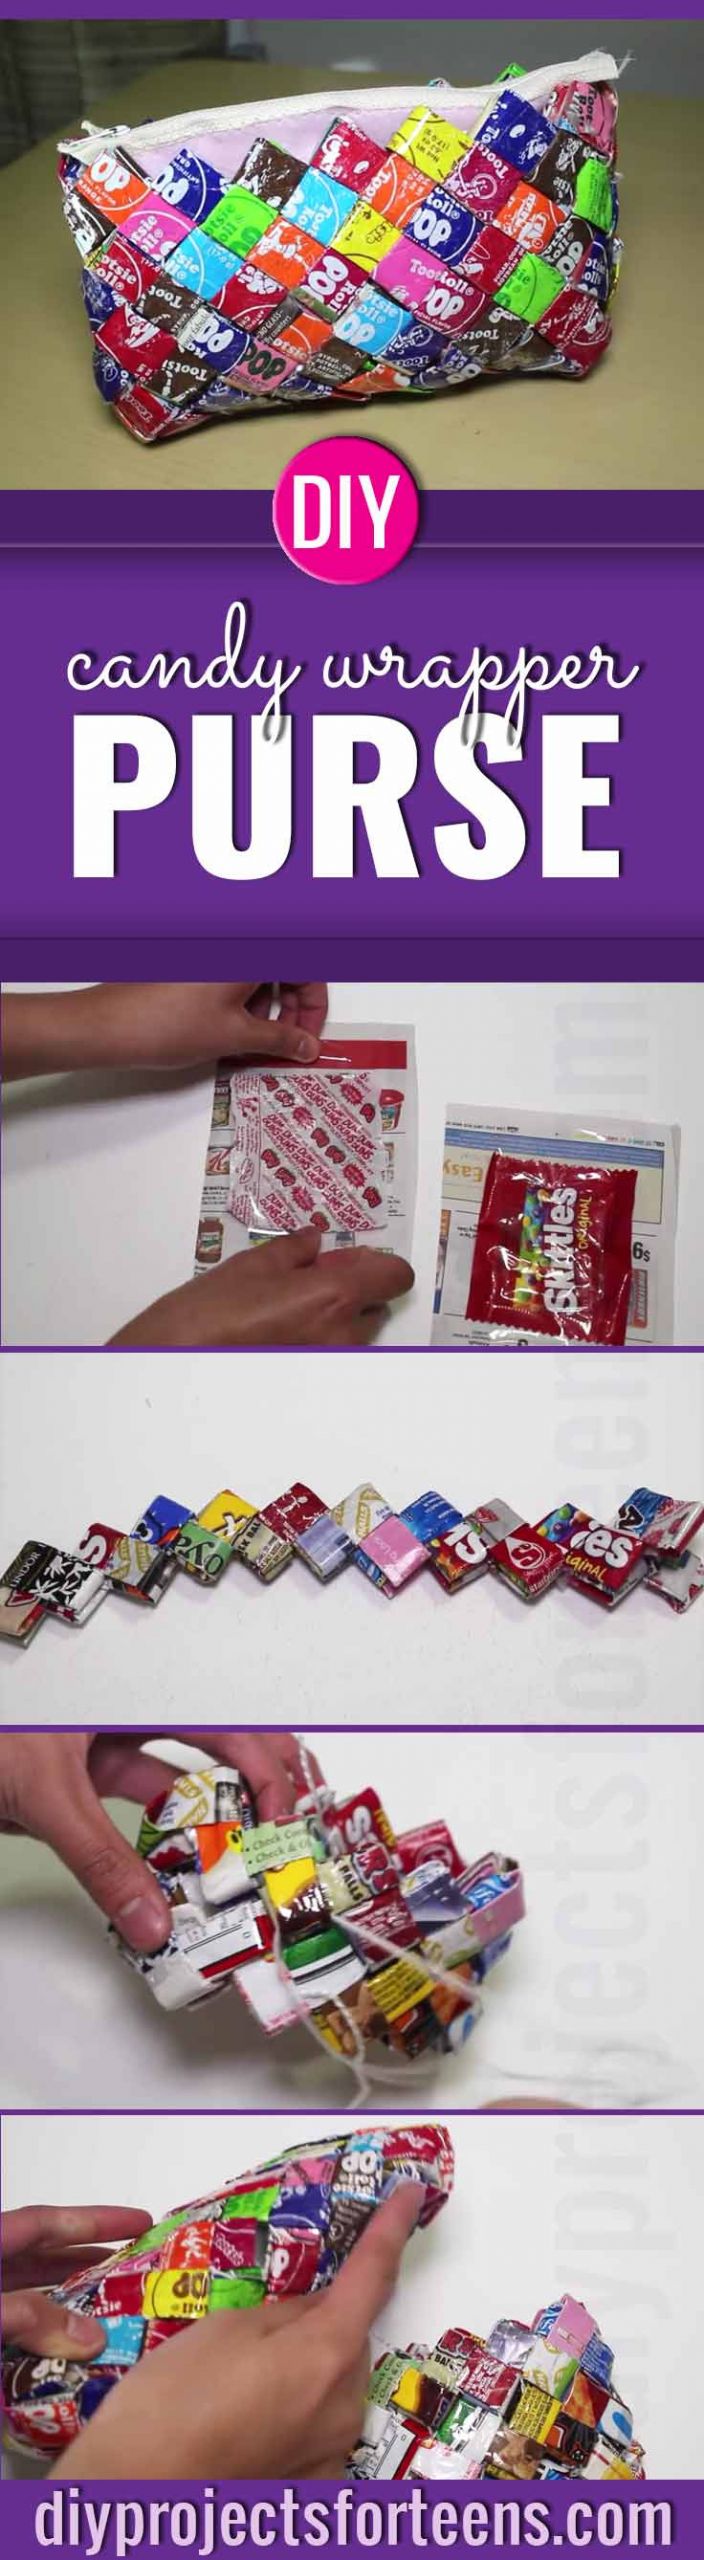 Craft Ideas For Adults Step By Step
 Ridiculously Cute DIY Candy Wrapper Purse